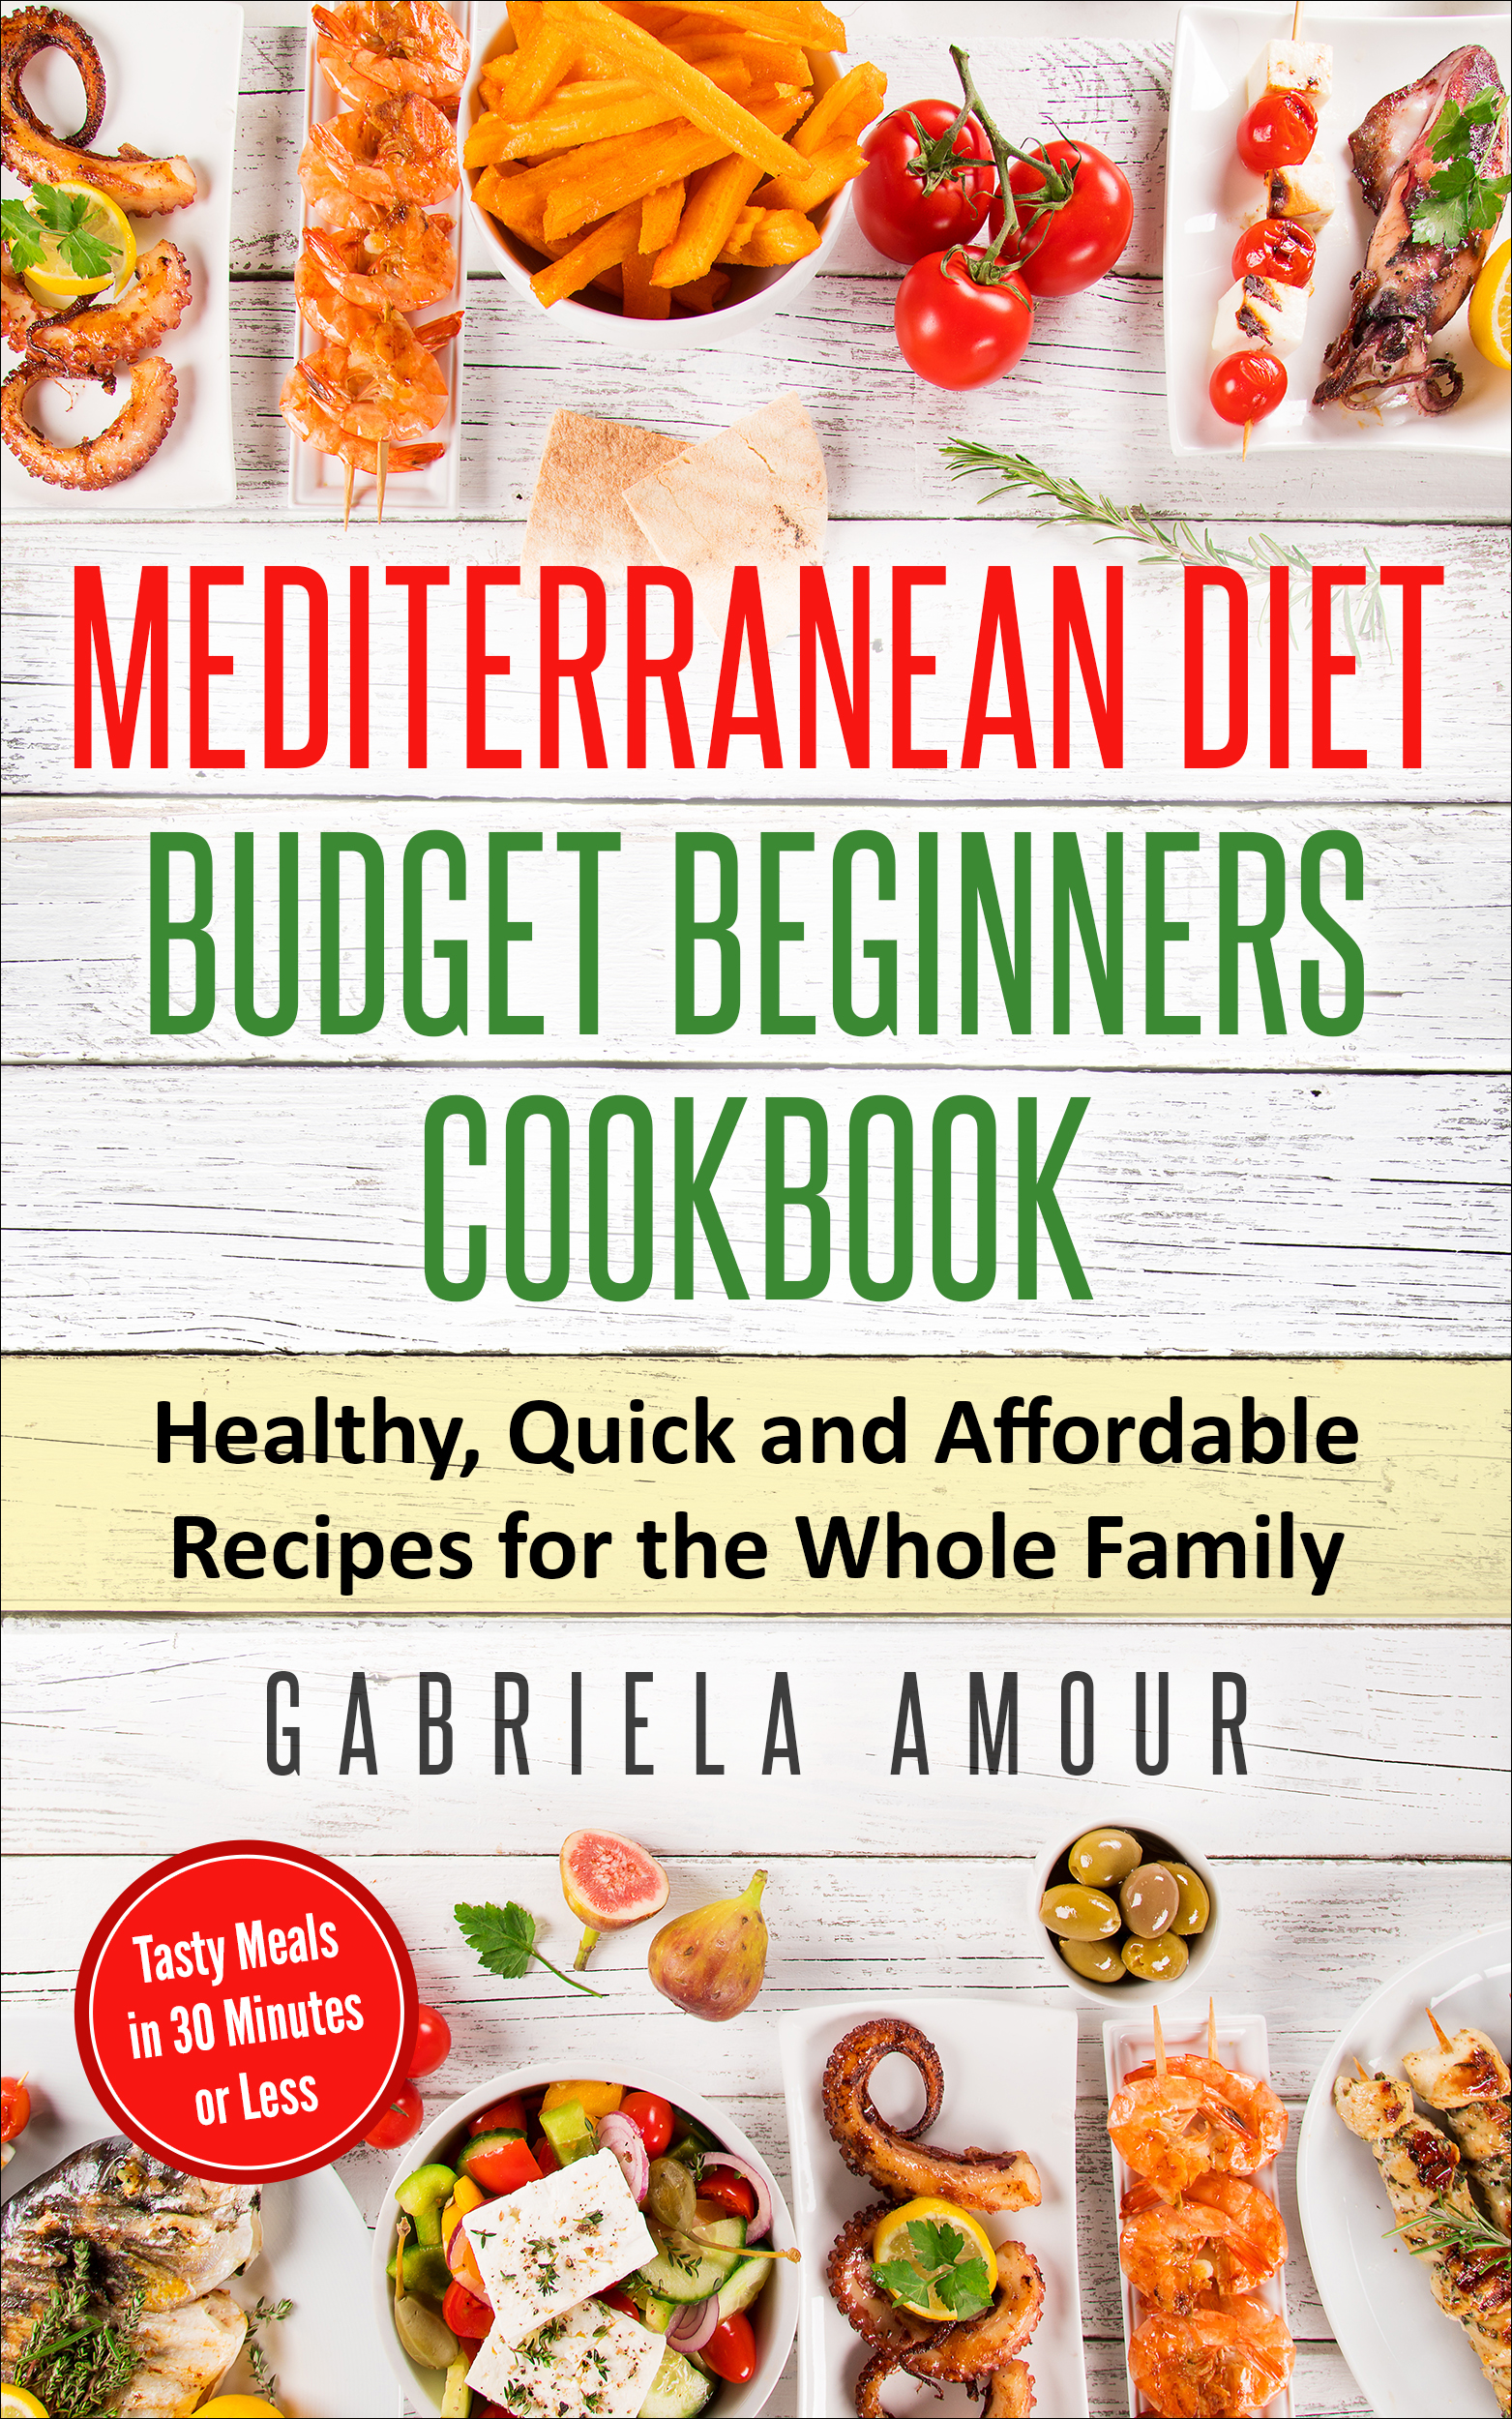 FREE: Mediterranean Diet Budget Beginners Cookbook: Healthy, Quick and Affordable Recipes for the Whole Family; Tasty Meals in 30 Minutes or Less by Gabriela Amour